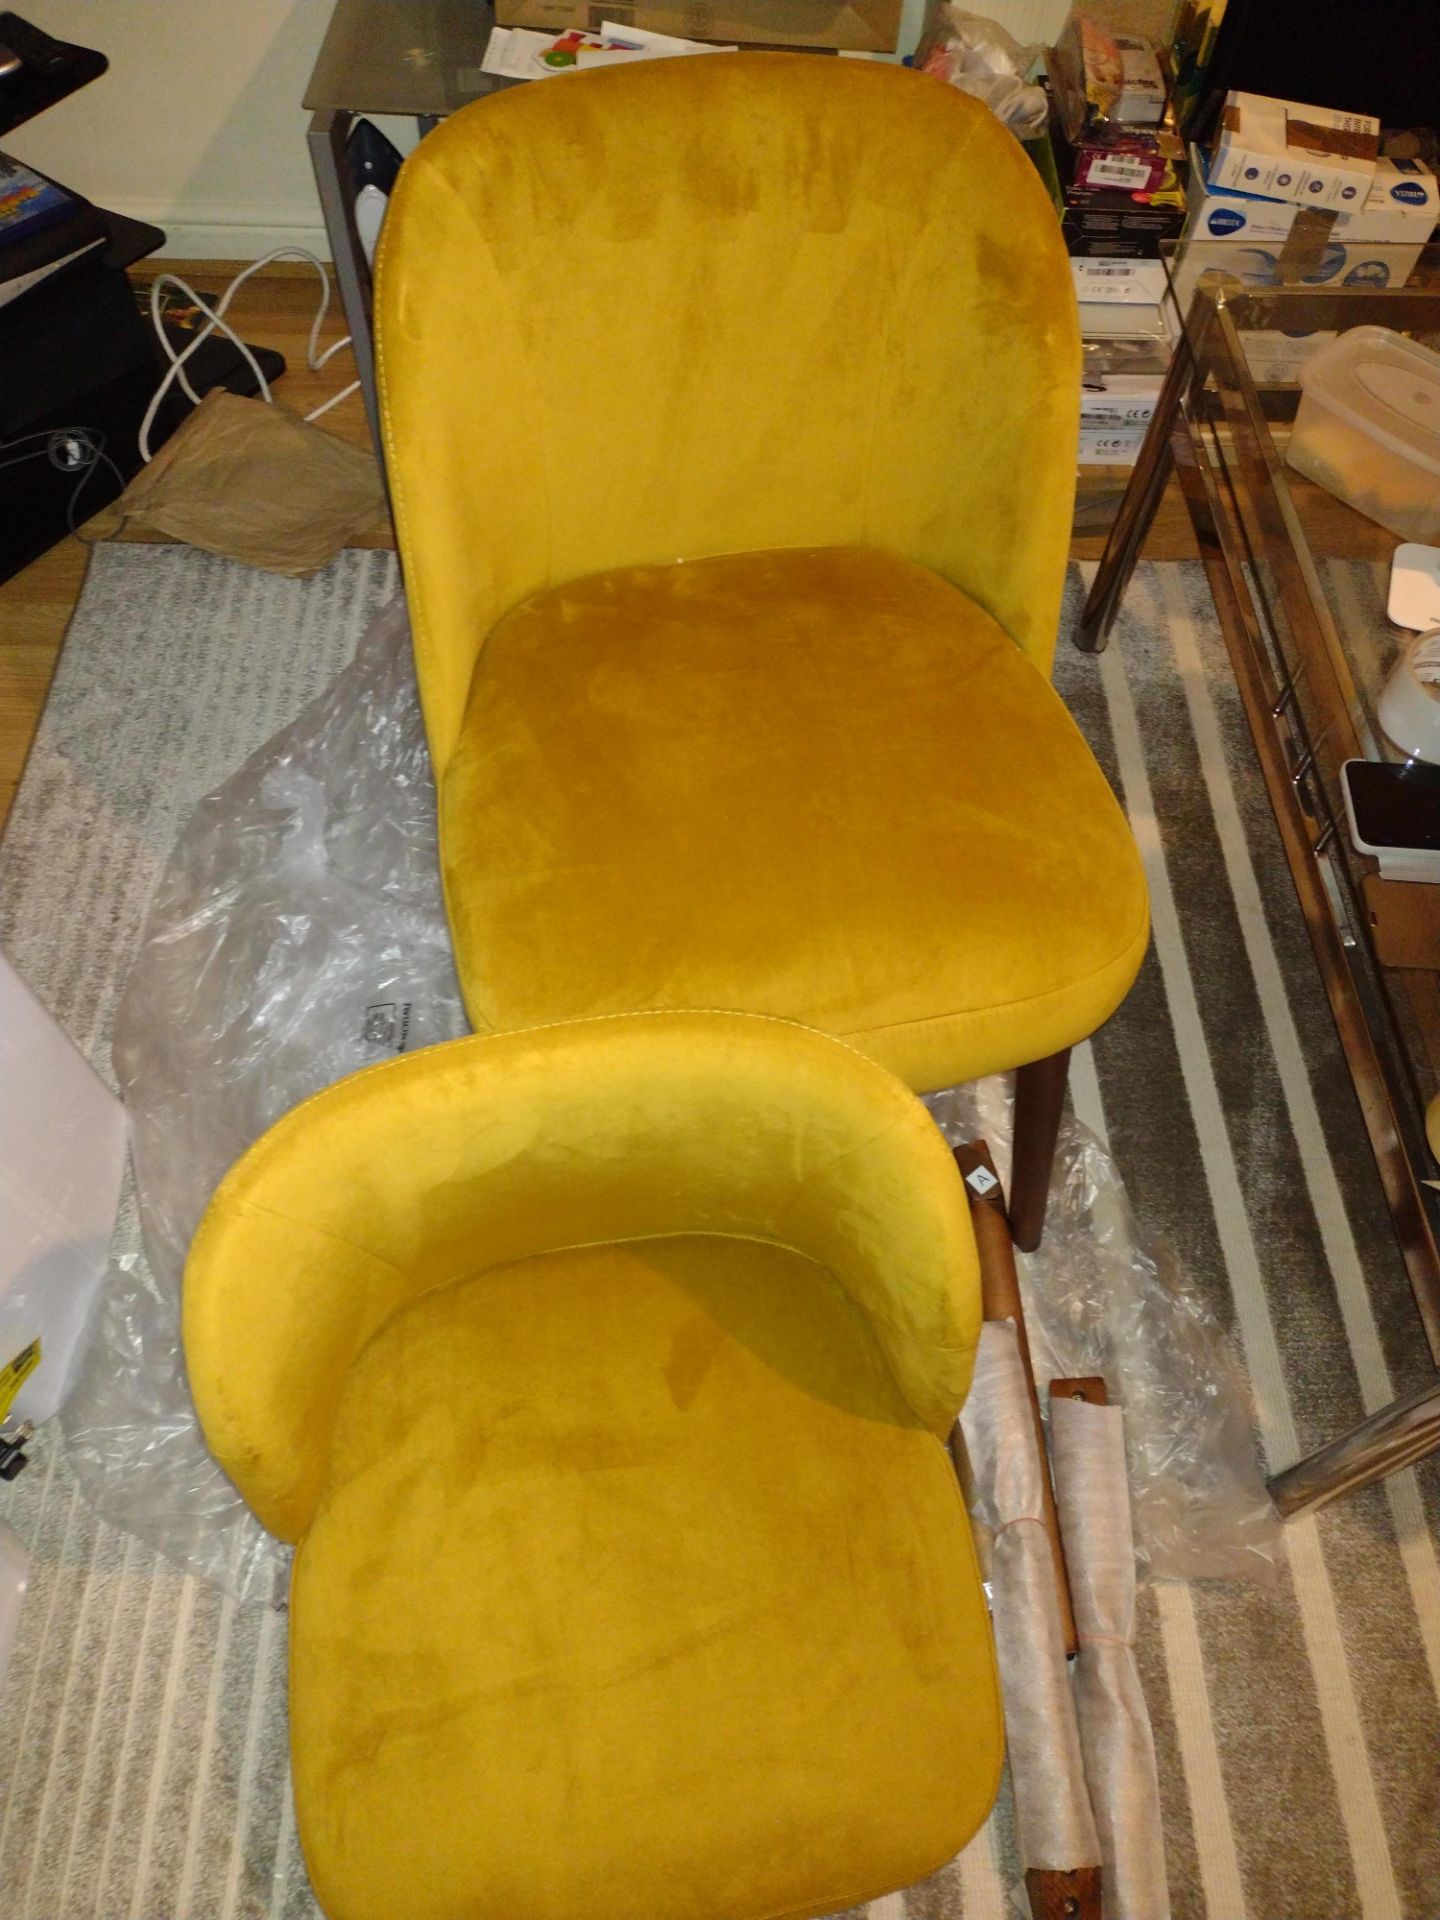 Swinton Dining Chairs, Saffron Yellow Velvet and Dark Stain (Set of 2) - Image 2 of 3